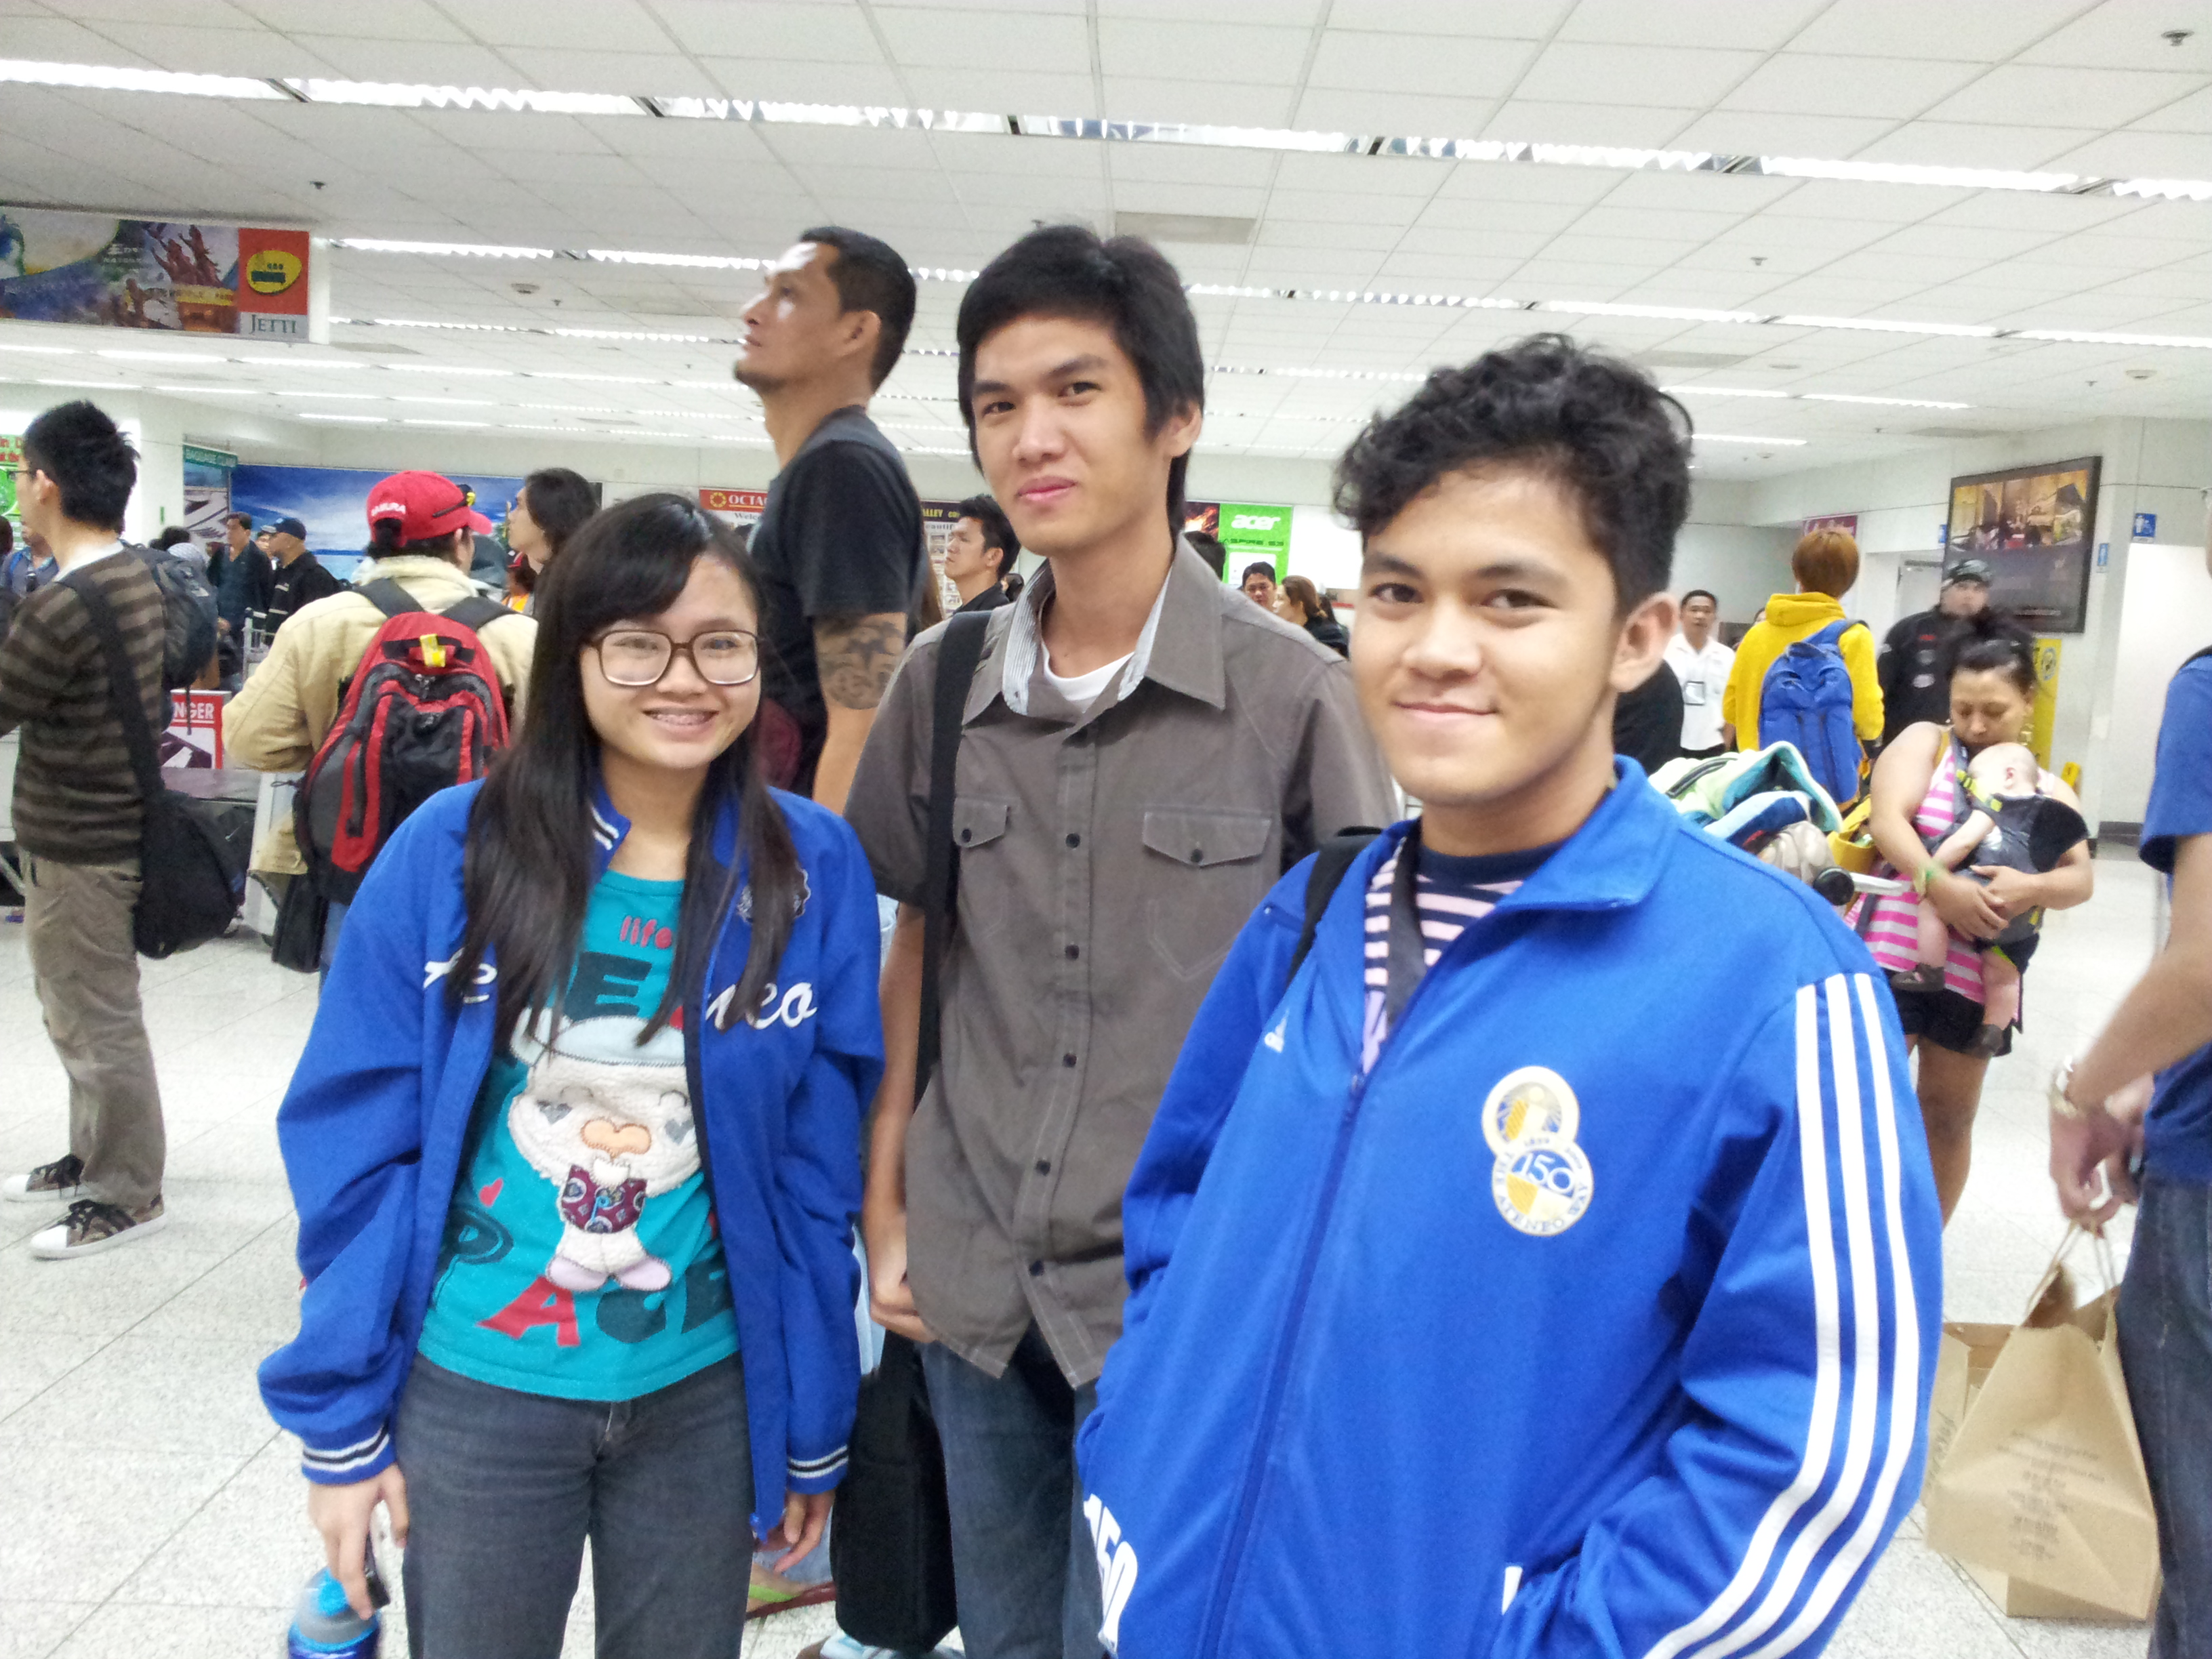 Erica, Marlou, and Nicko in the Davao airport